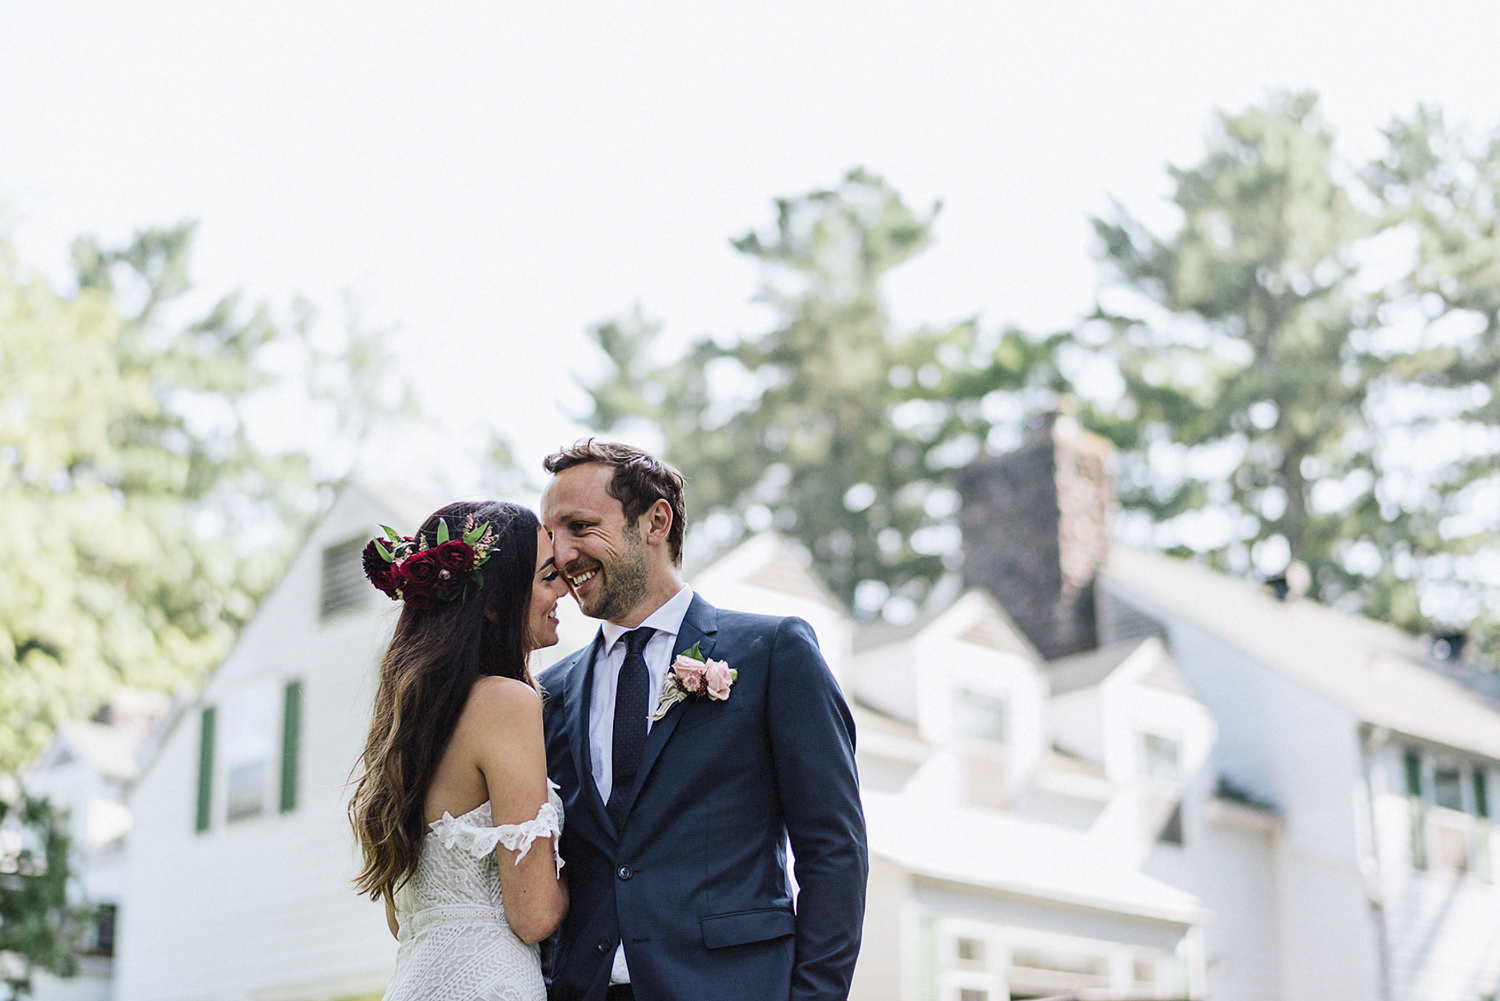 Muskoka-Cottage-Wedding-Photography-Photographer_Photojournalistic-Documentary-Wedding-Photography_Vintage-Bride-Lovers-Land-Dress_Rue-Des-Seins_Forest-Reception-Candid-Moment-Couple.jpg